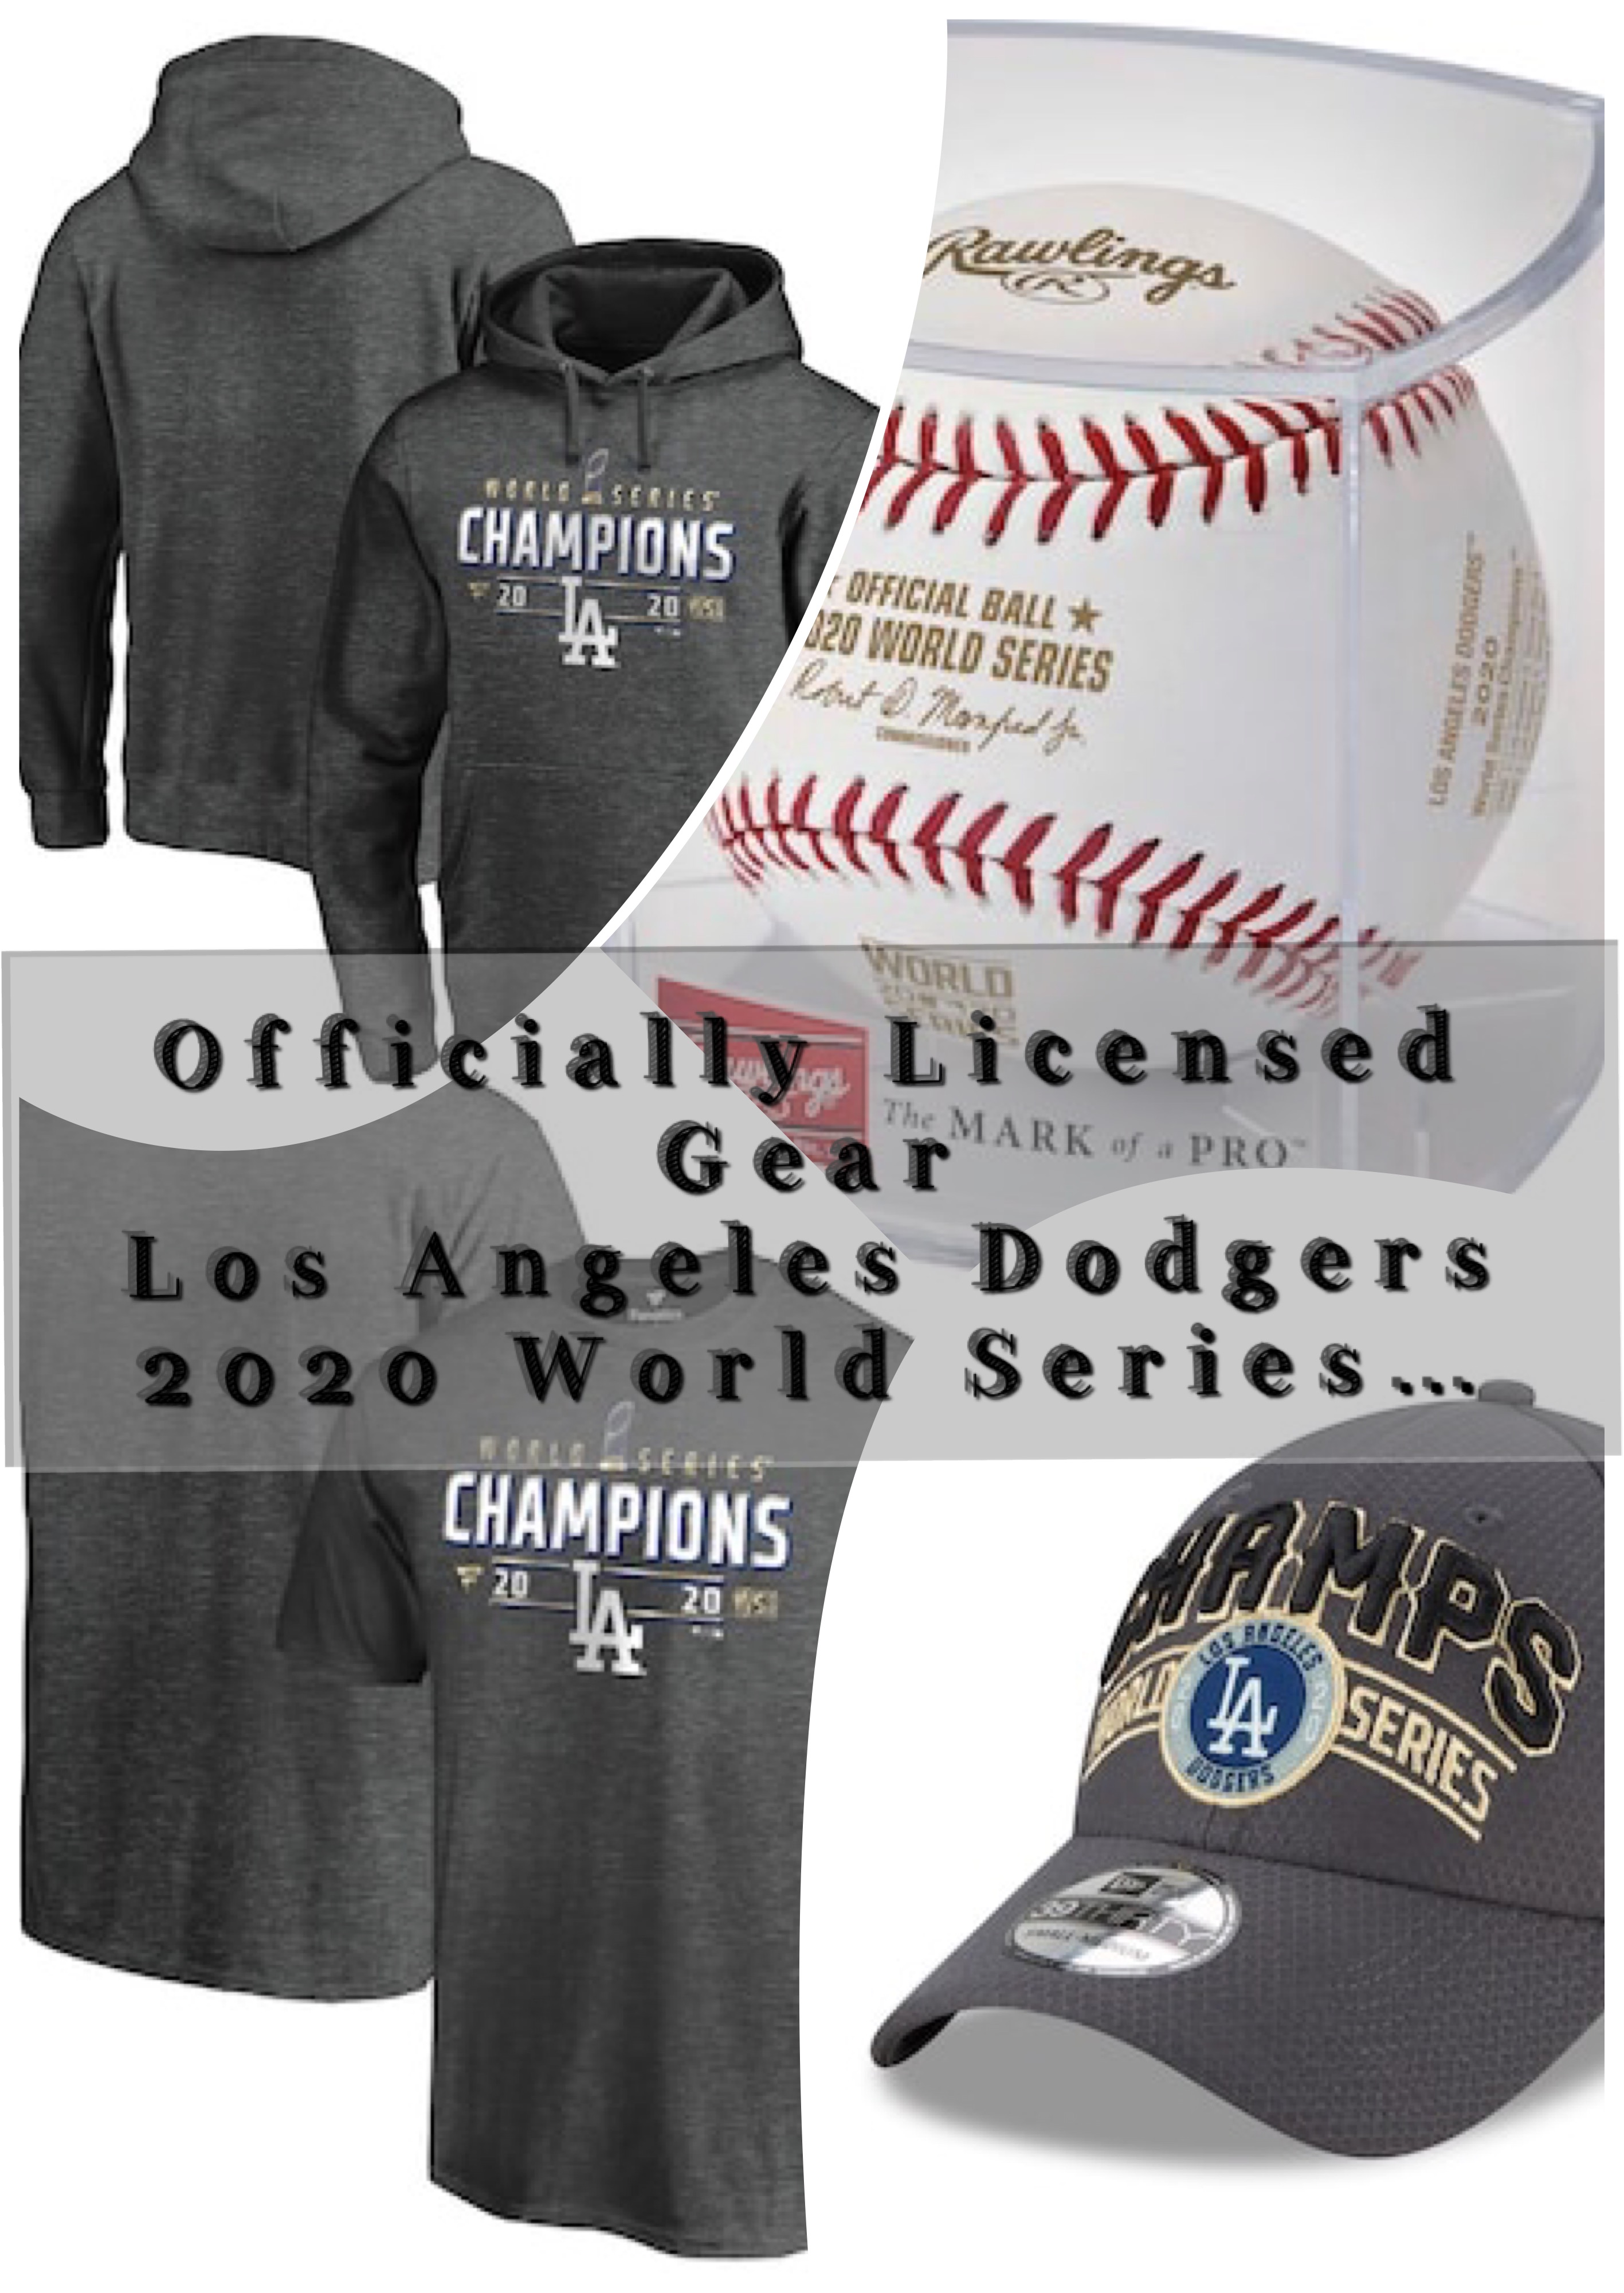 2020 World Series Champions Los Angeles Dodgers Gears